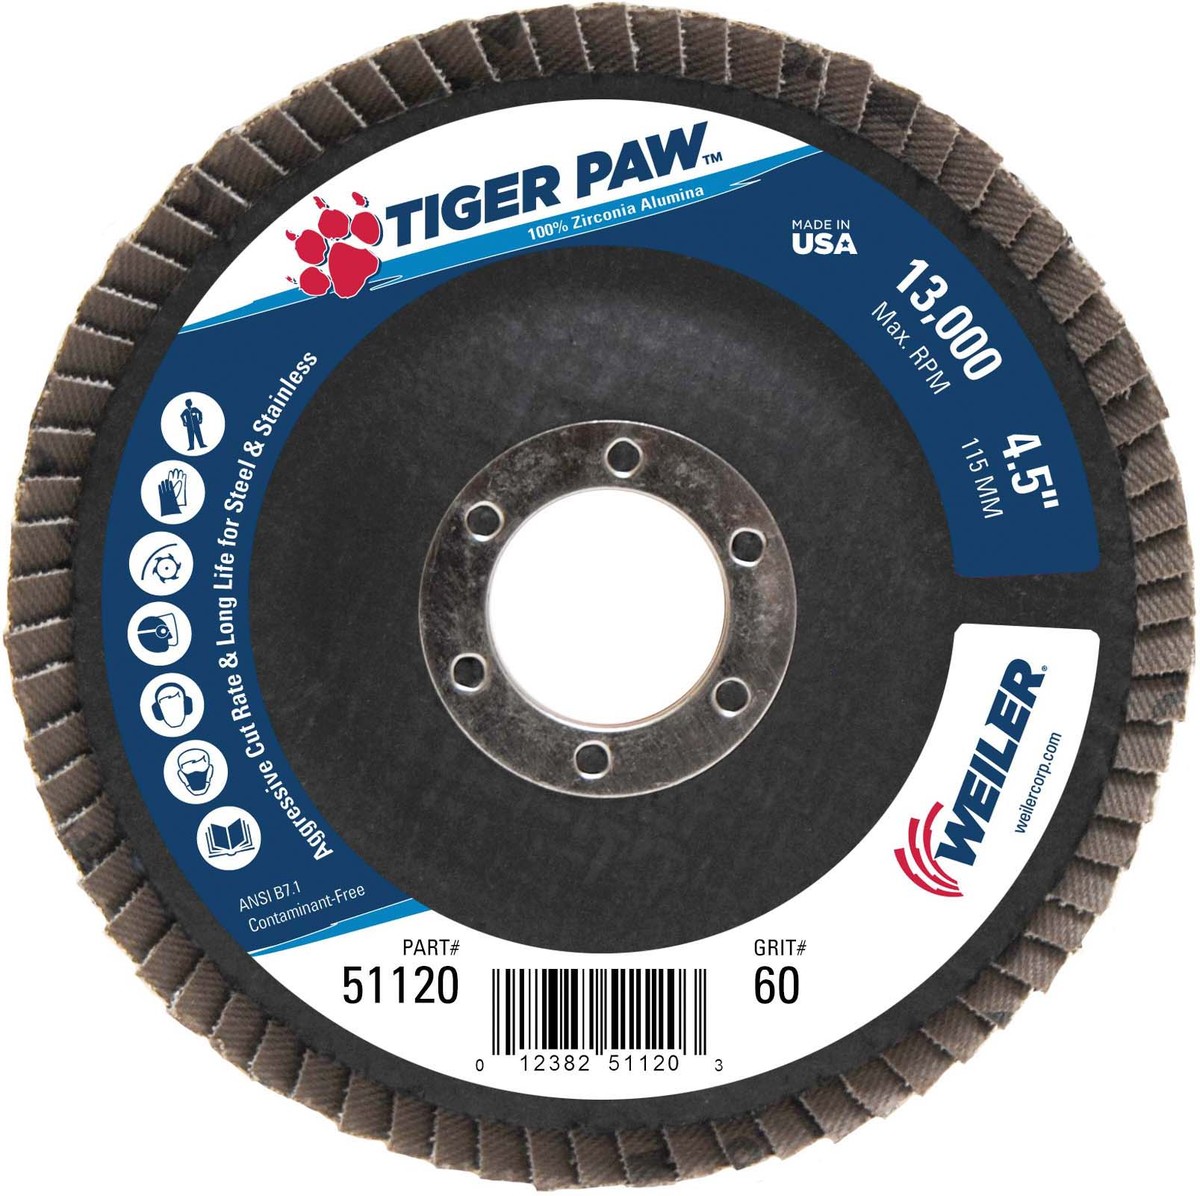 13000 rpm Pack of 10 60 Grit 7/8 4 1/2 Weiler 804-50003 Tiger Trimmable Zirconia Alumina Type 29 Angled Flap Disc 